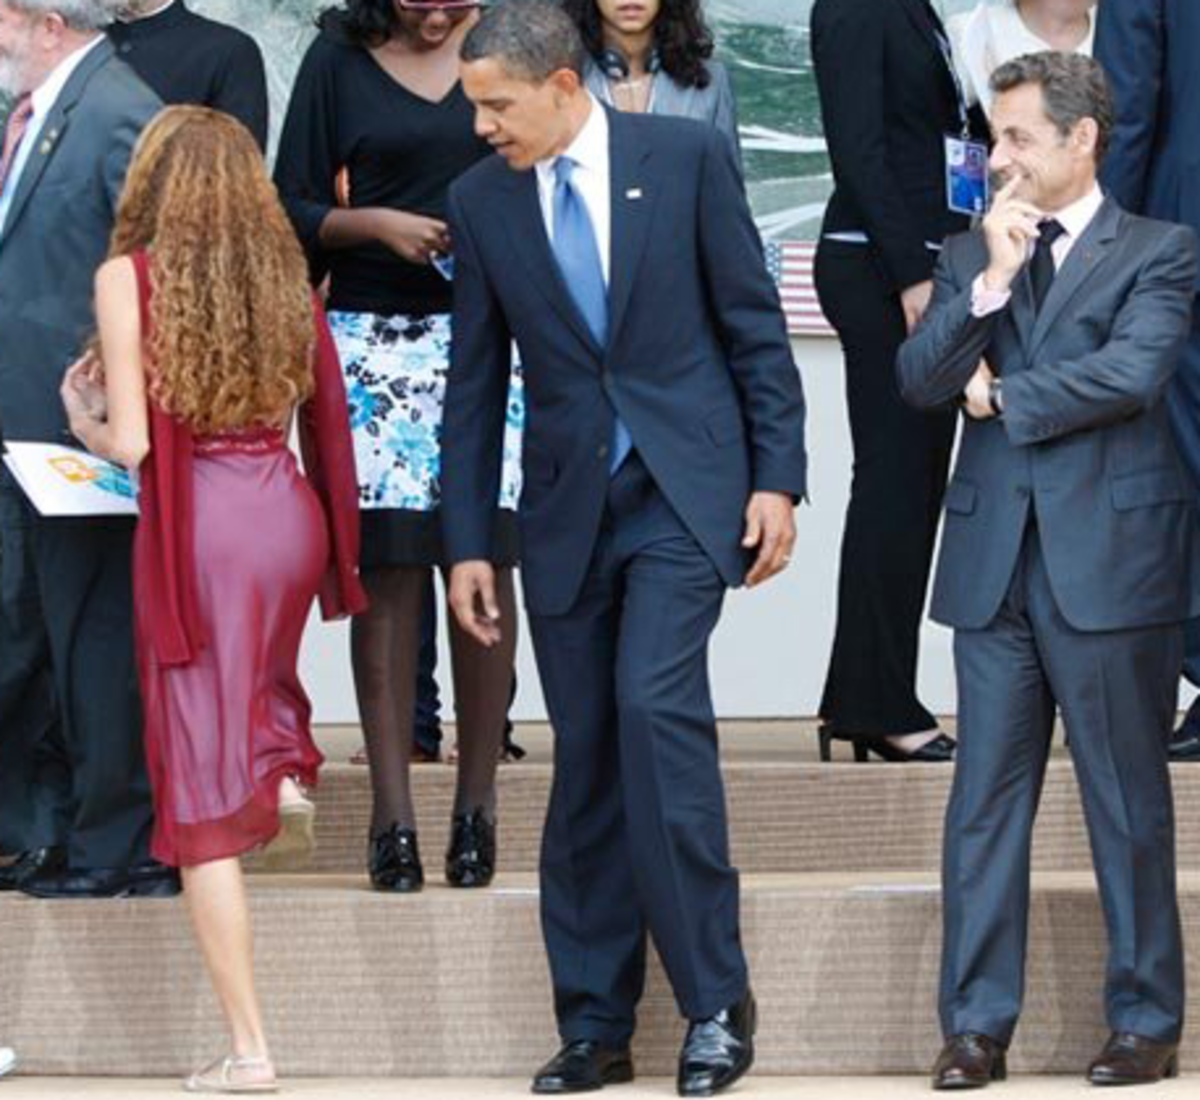 World Leaders Admiring Shapely Things